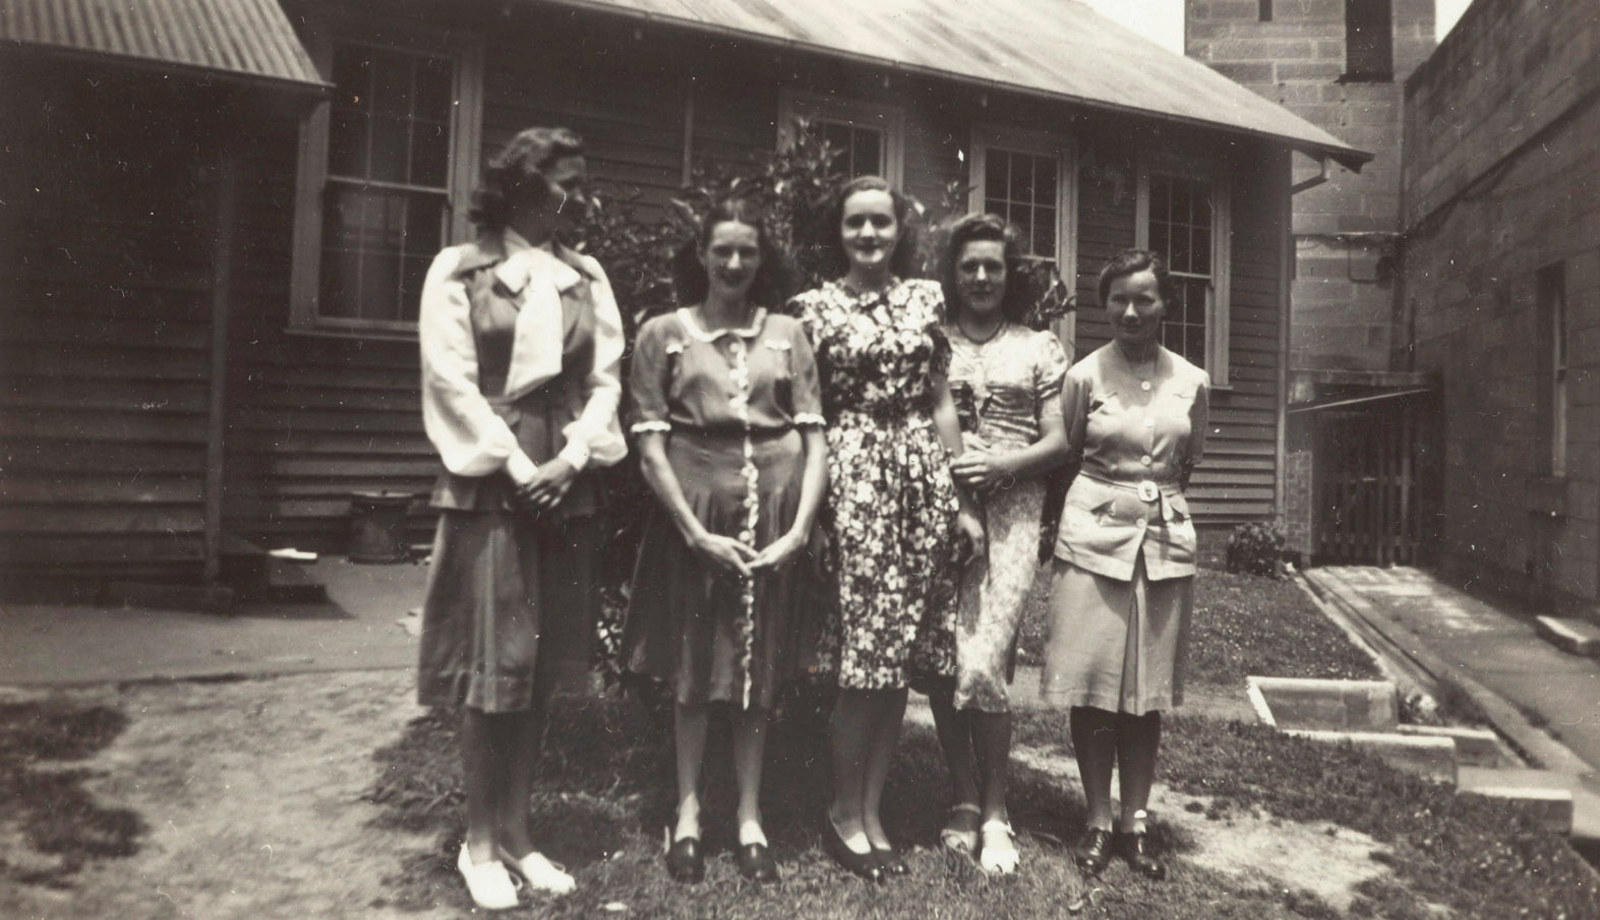 Helen Burgess (far right) with fellow students at East Sydney Technical College, mid 1940s